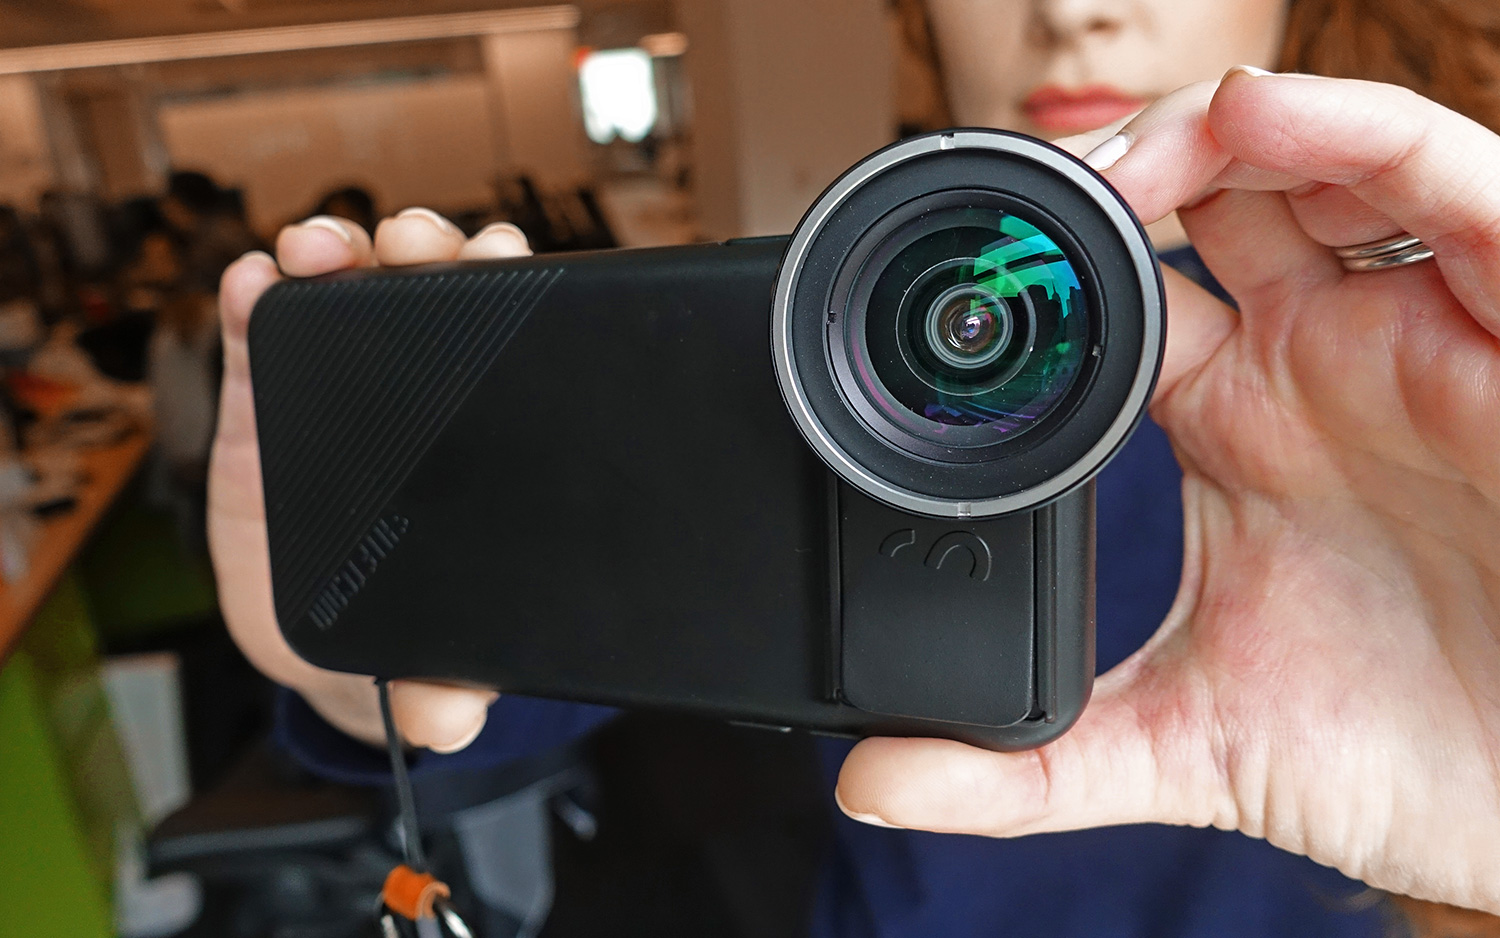 ShiftCam ProLens Series help you capture more fun and interesting